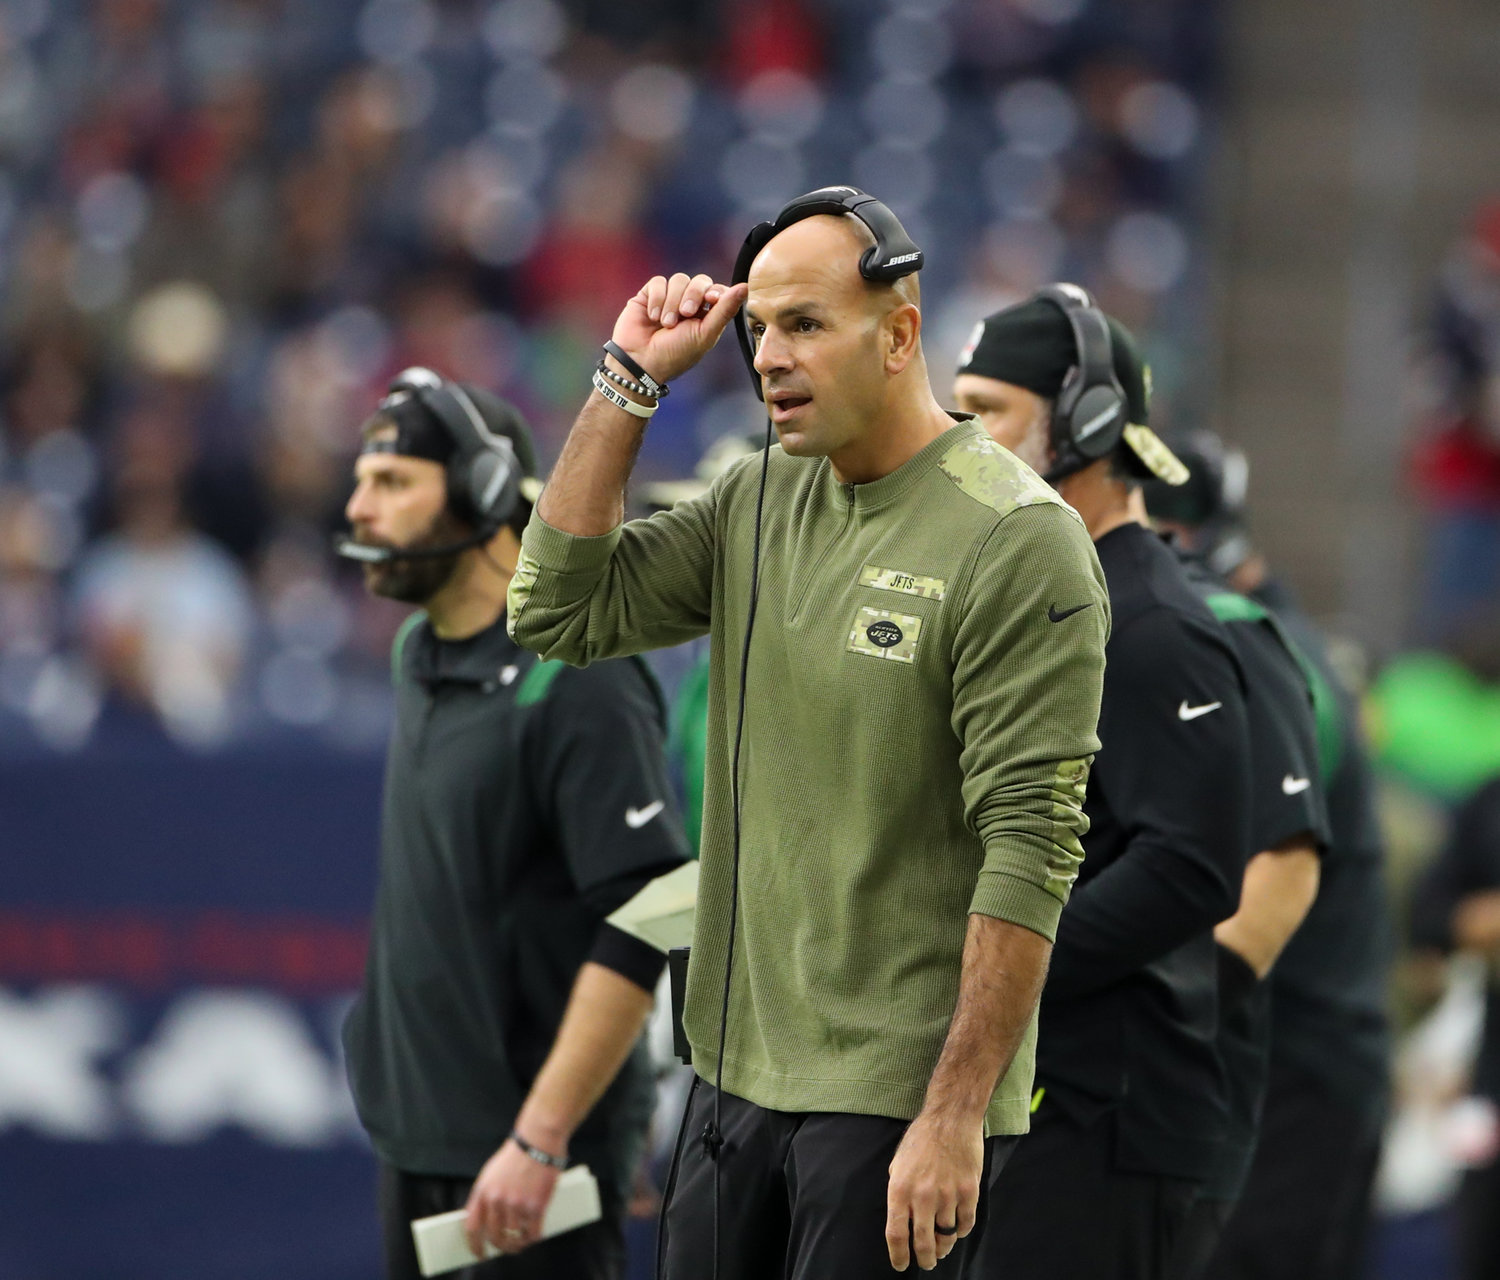 New York Jets head coach Robert Saleh during an NFL game between the Houston Texans and the New York Jets on November 28, 2021 in Houston, Texas. The Jets won, 21-14